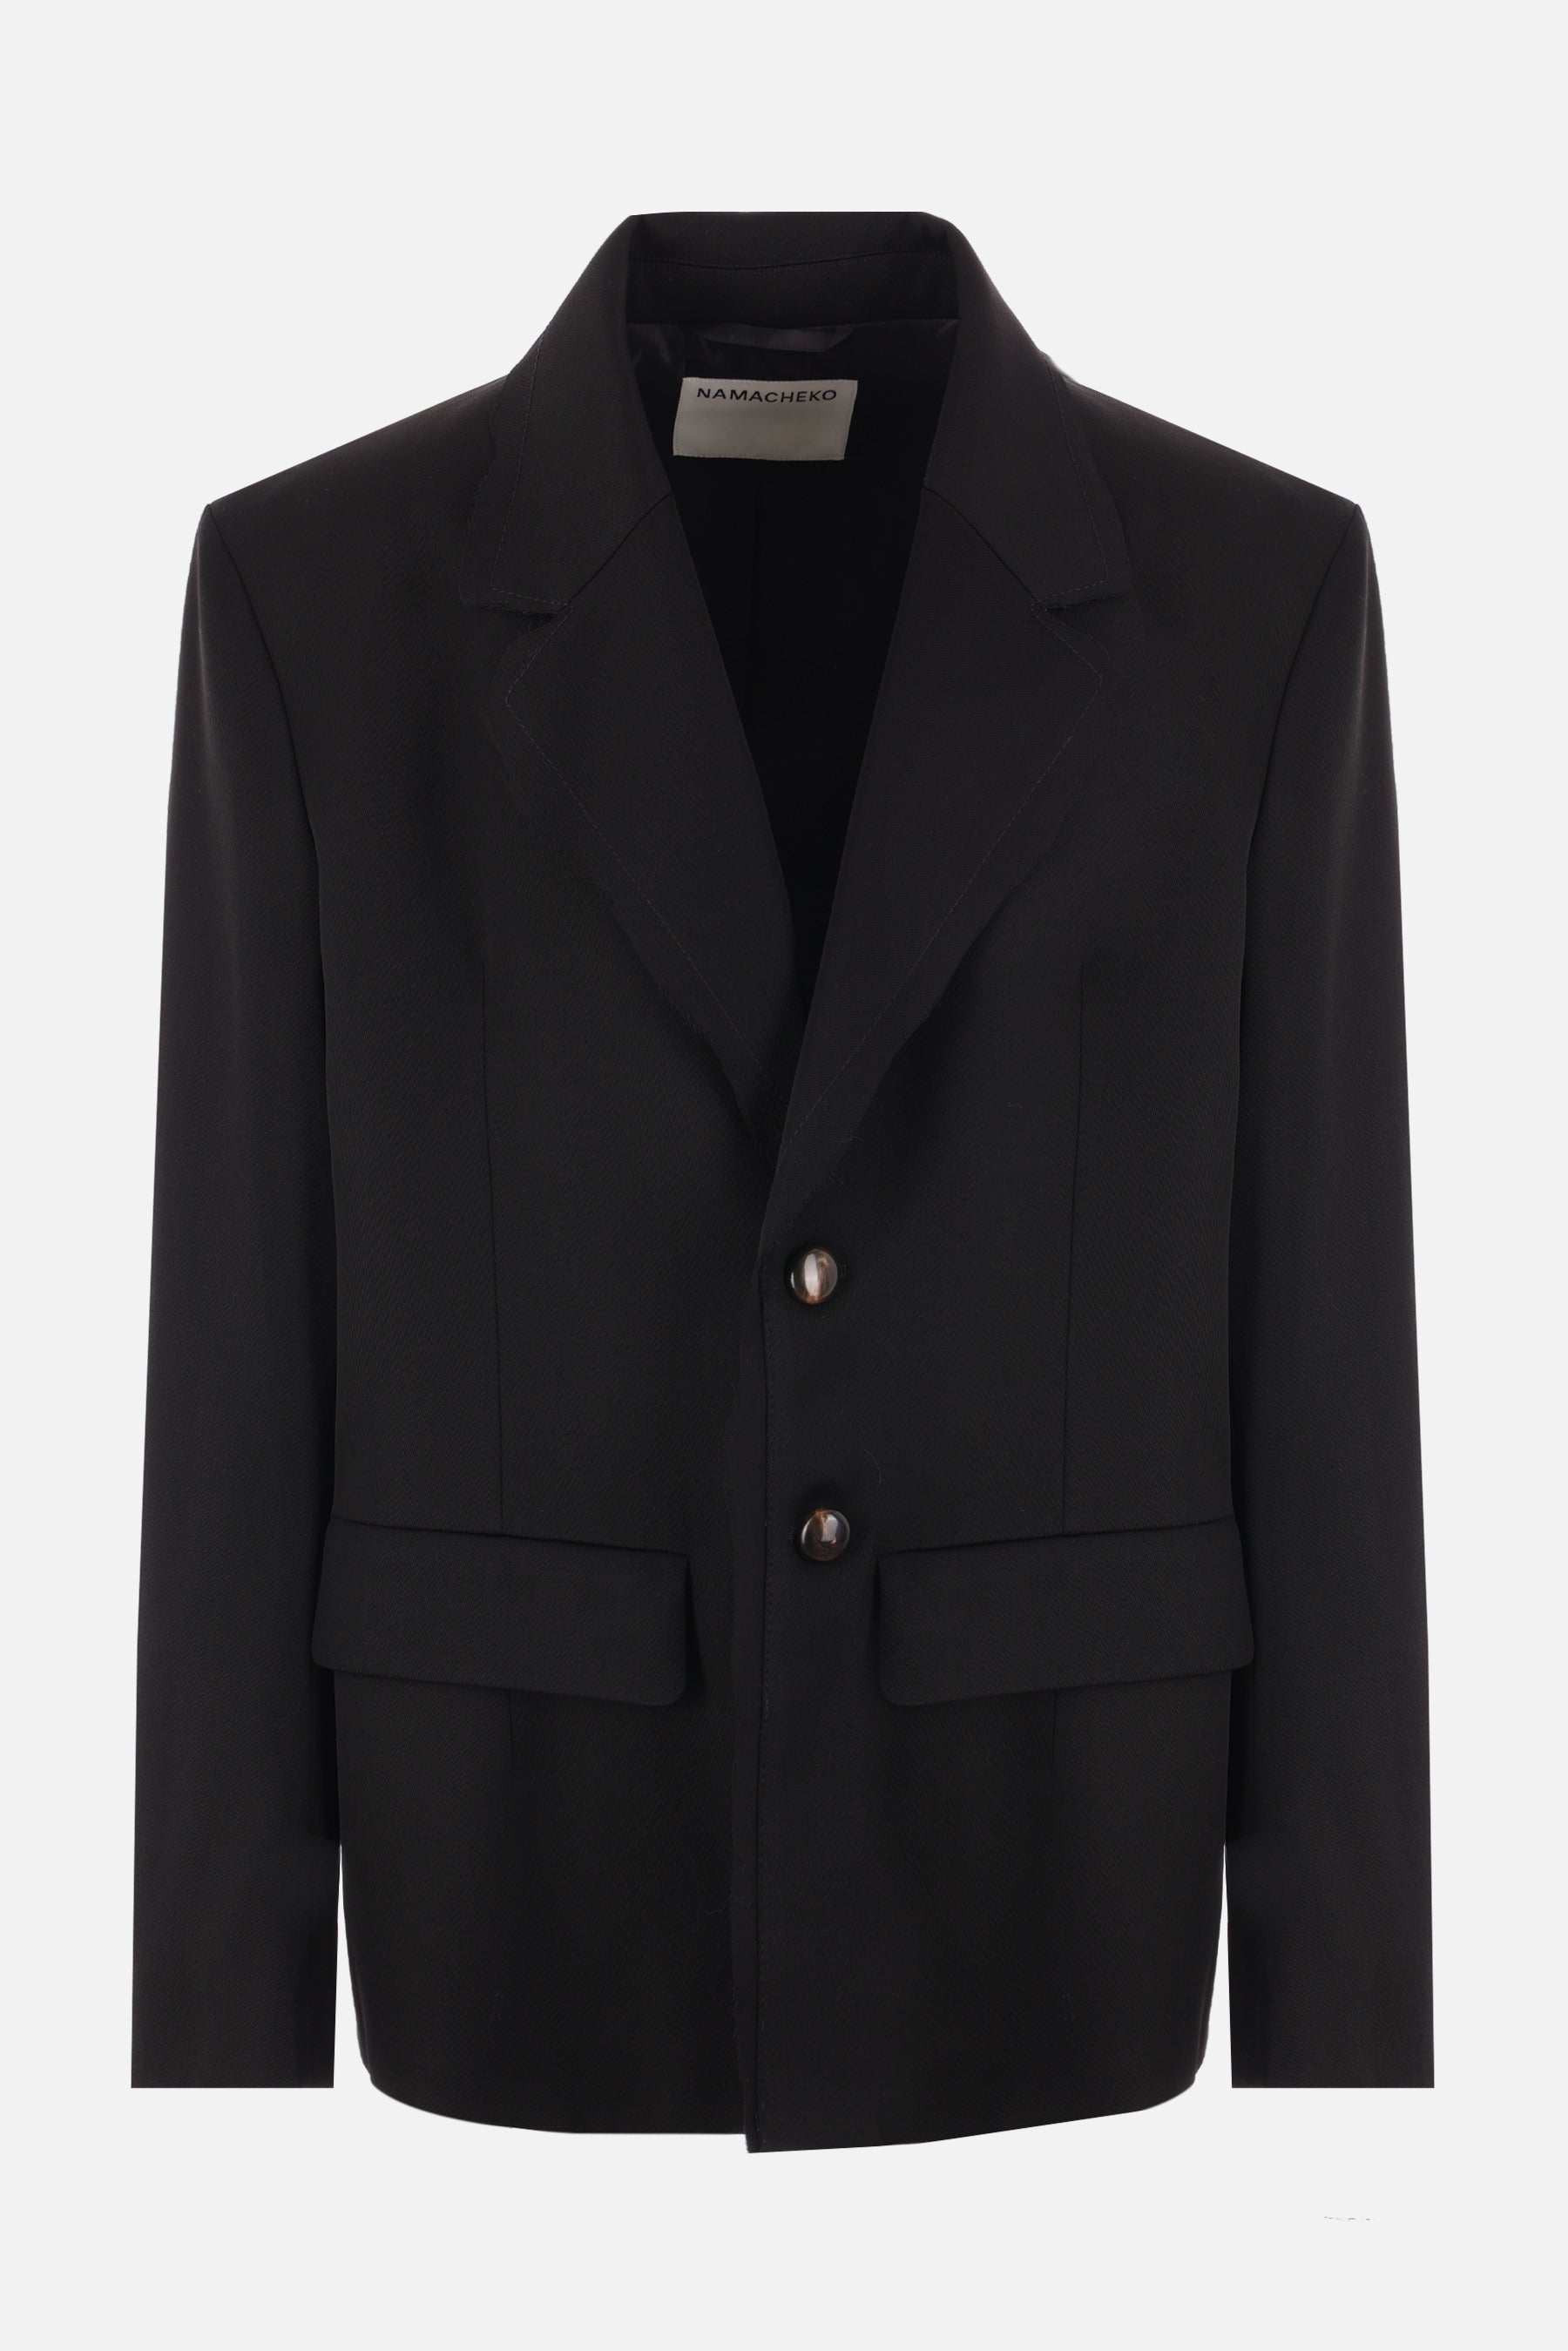 Beche tailoring single-breasted twill jacket